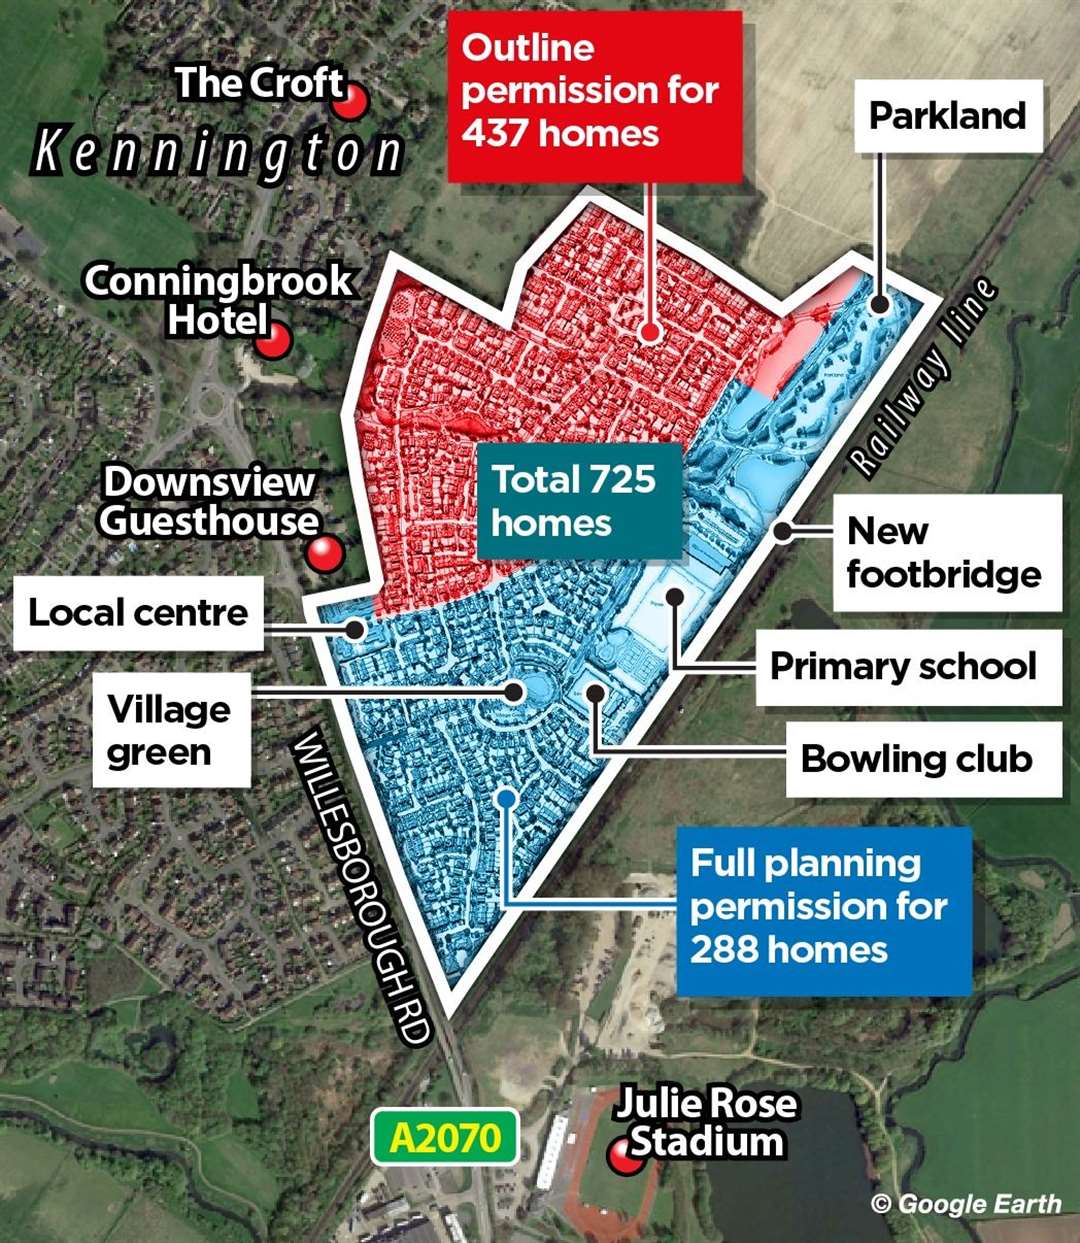 An overview of the 'Large Burton' site, showing which area has been fully approved and which has been allowed in principle